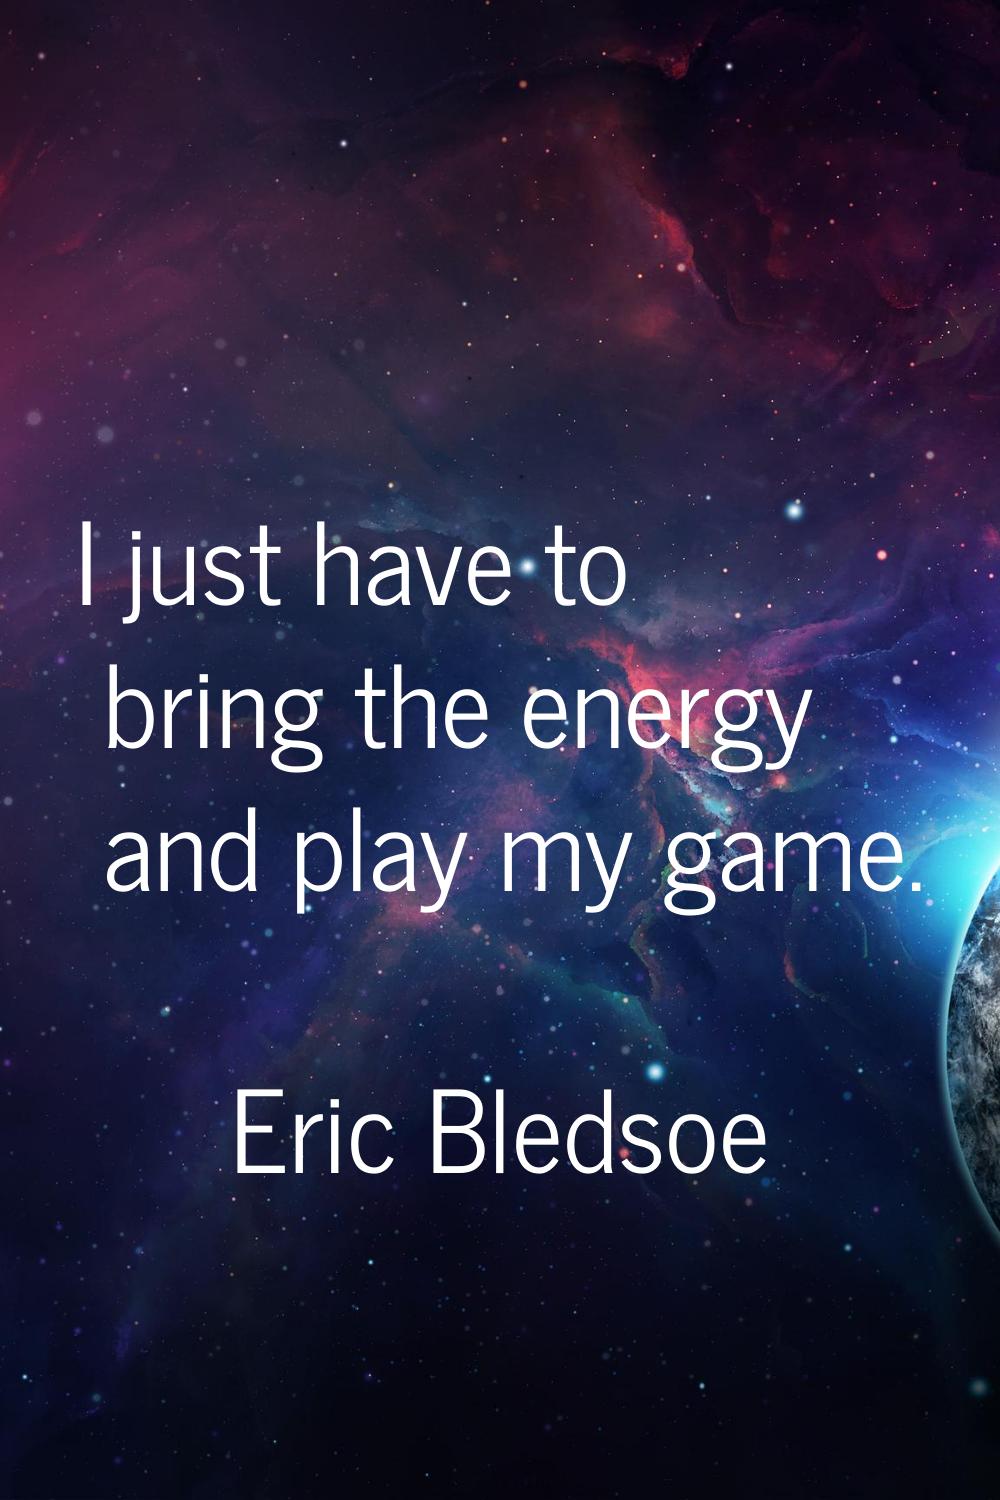 I just have to bring the energy and play my game.